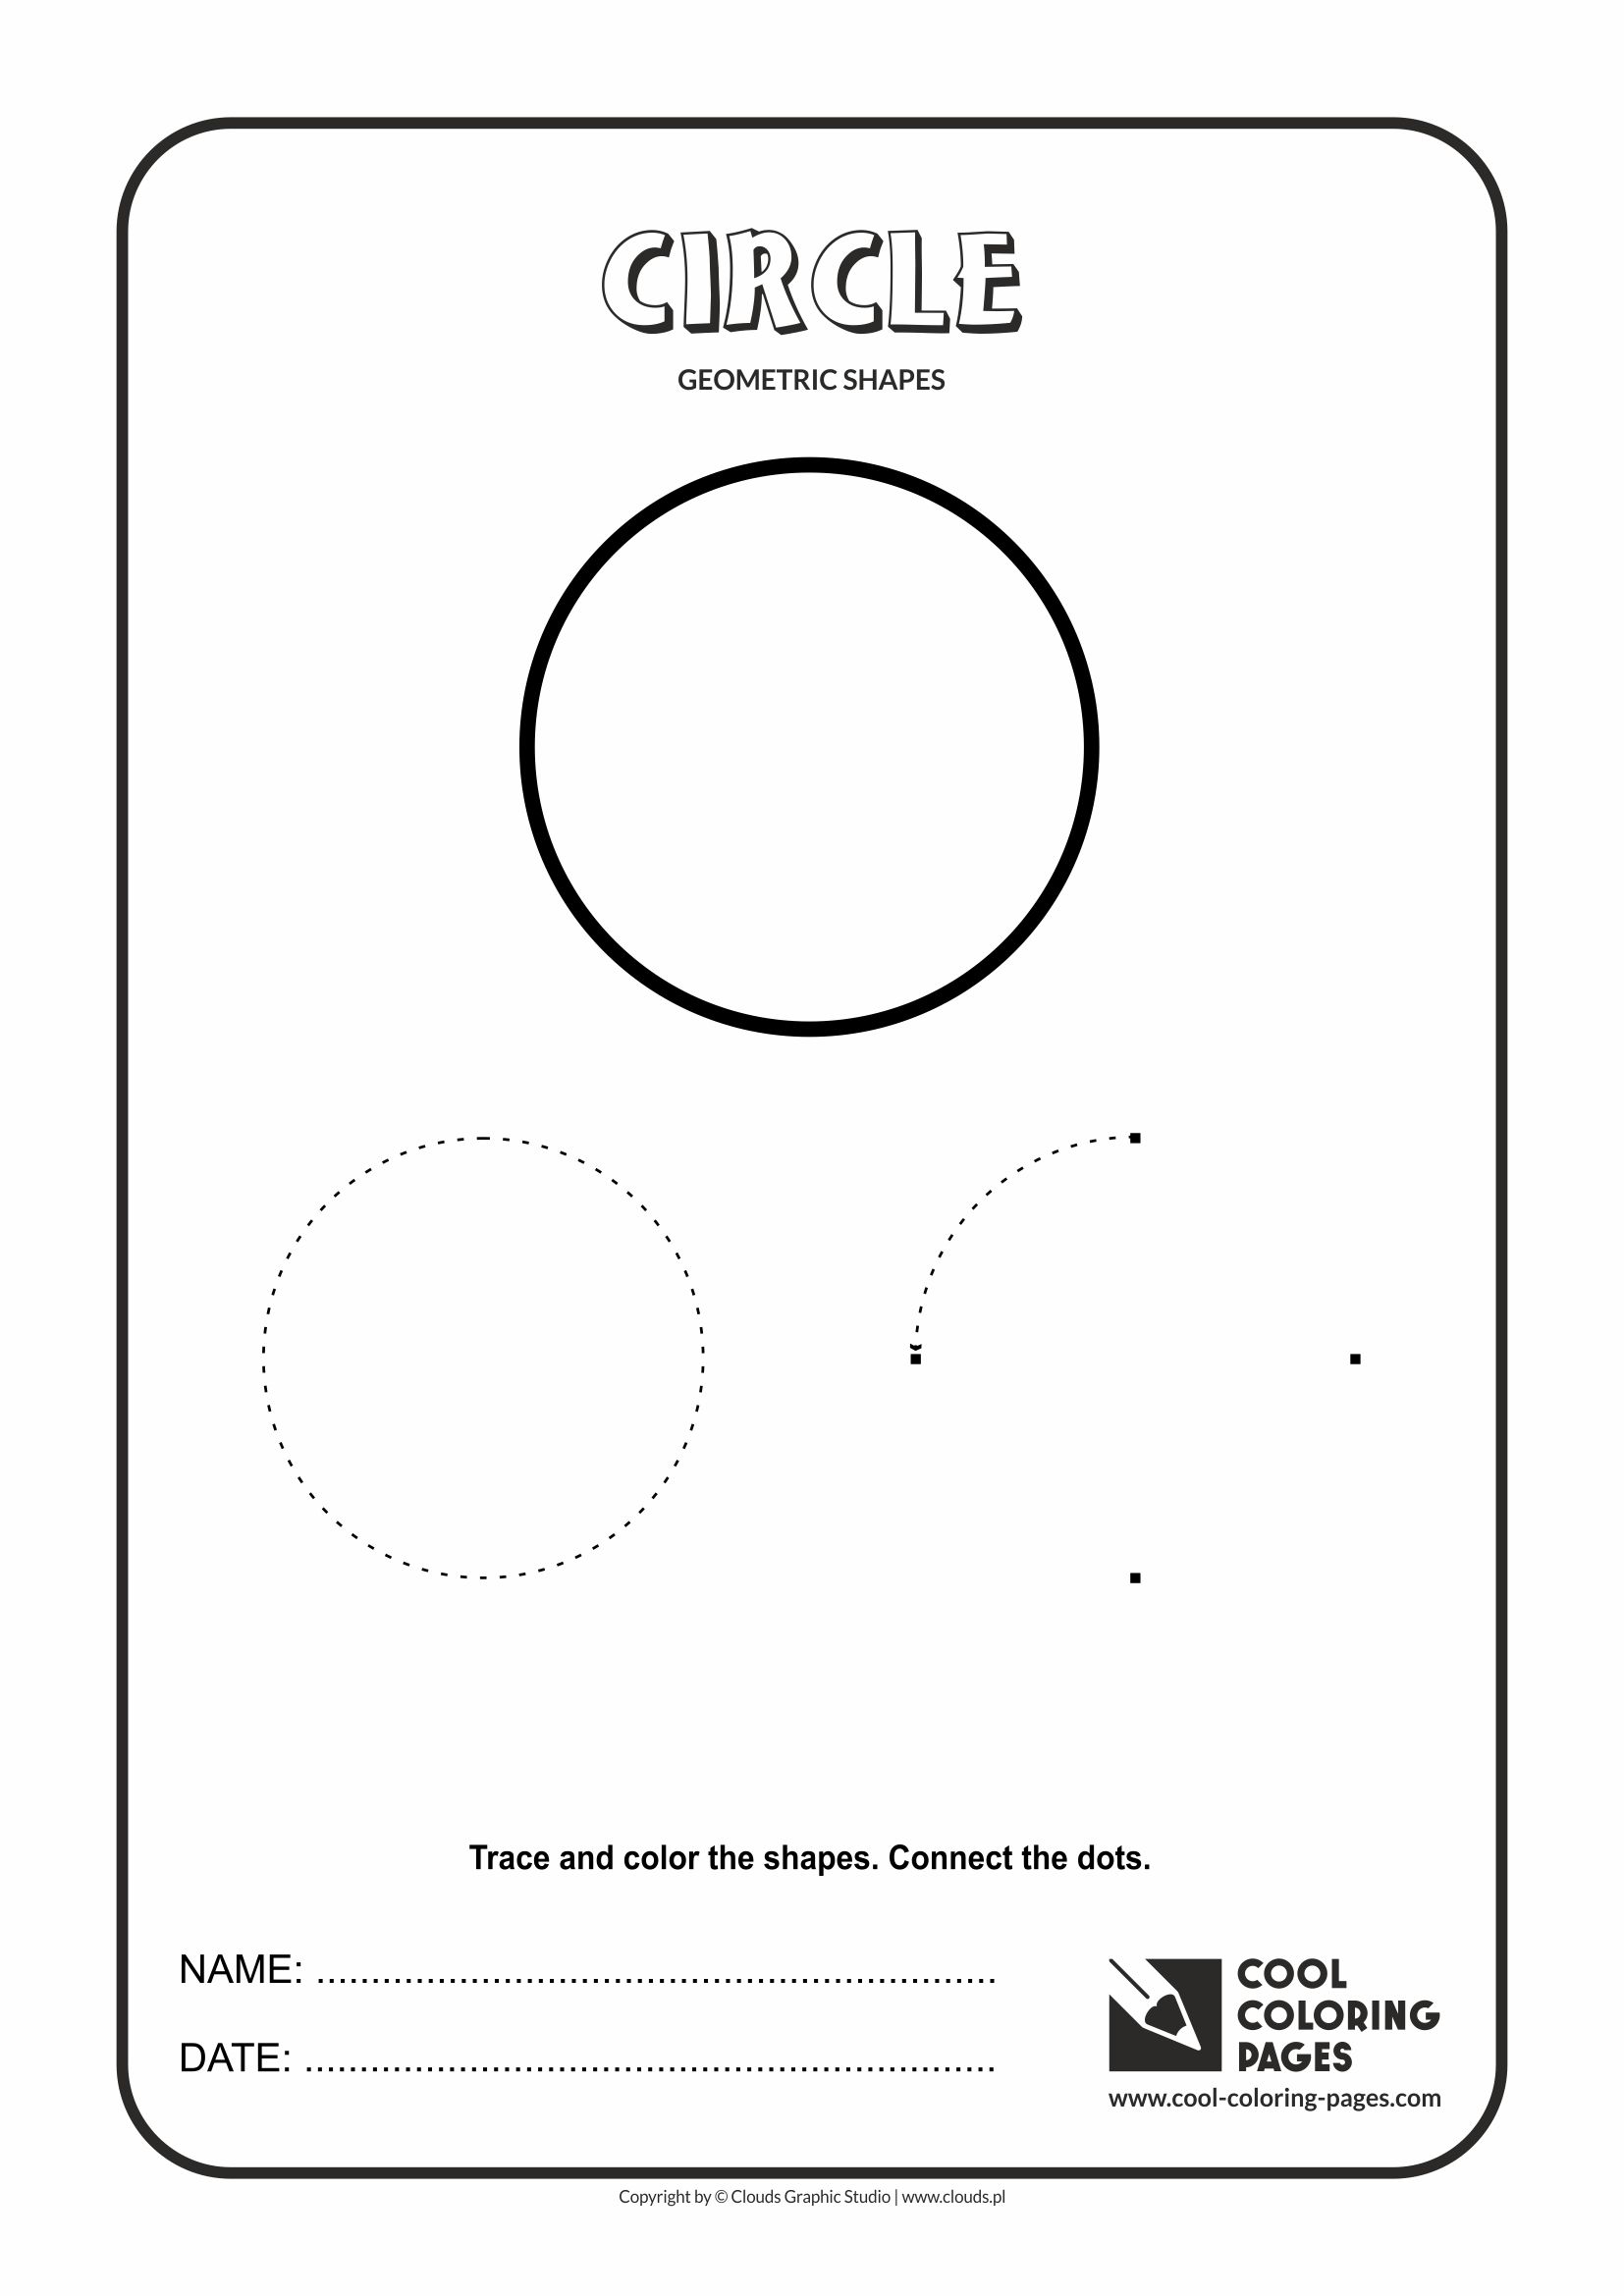 Cool Coloring Pages - Geometric shapes / Circle